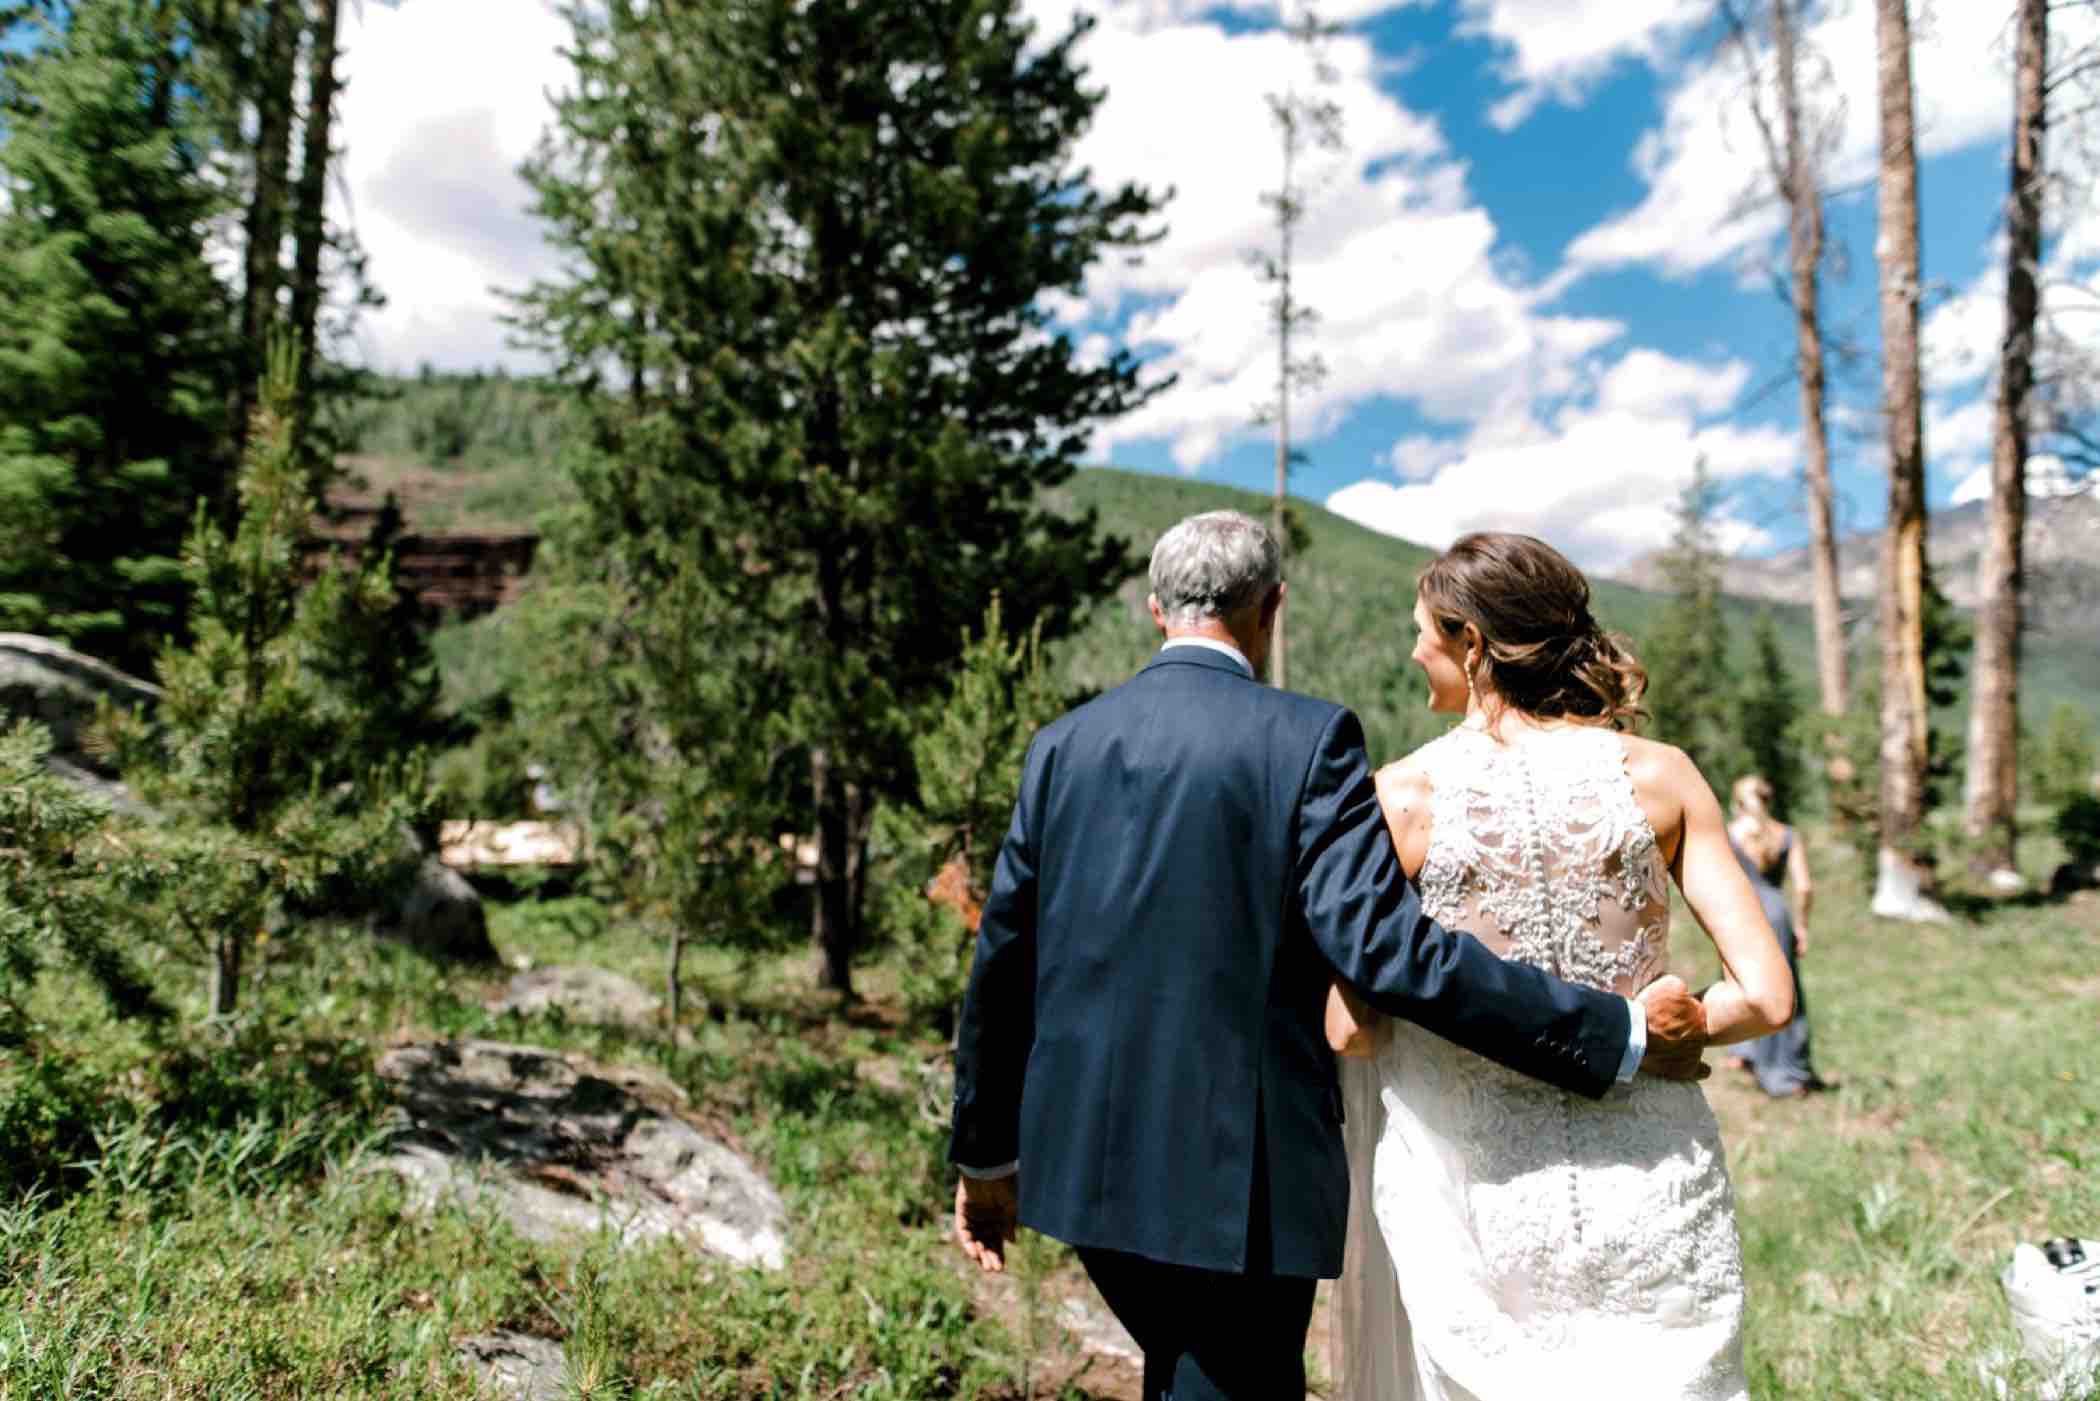 Sallie, the bride, and her father walk through the Vail pine forest outside Piney River Ranch. Photo by Ali and Garrett, Romantic, Adventurous, Nostalgic Wedding Photographers.